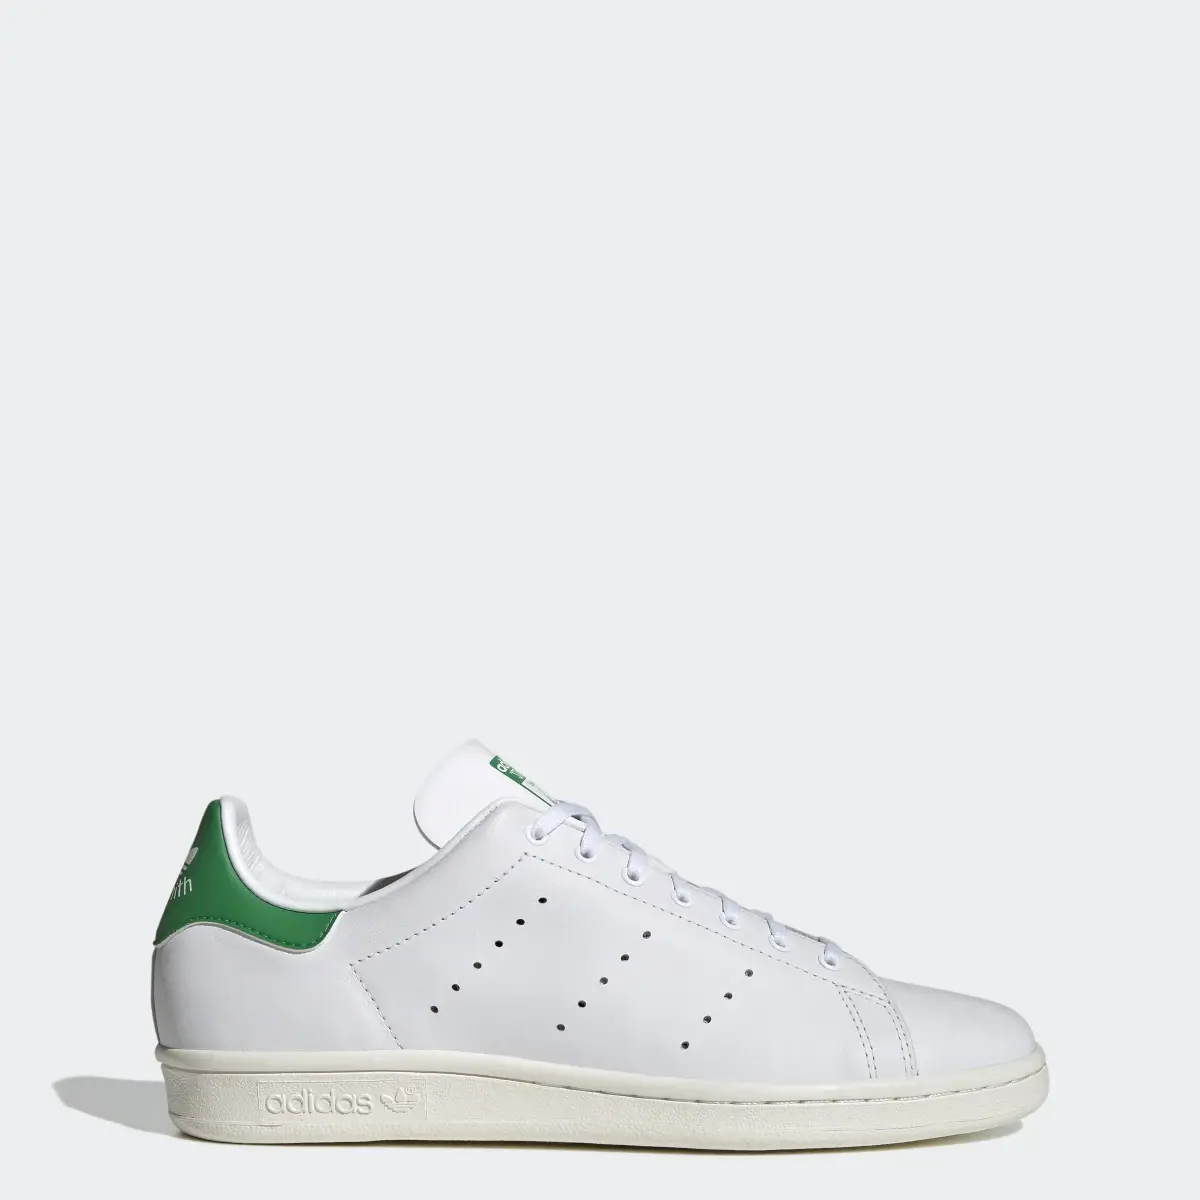 Adidas Stan Smith 80s Shoes. 1